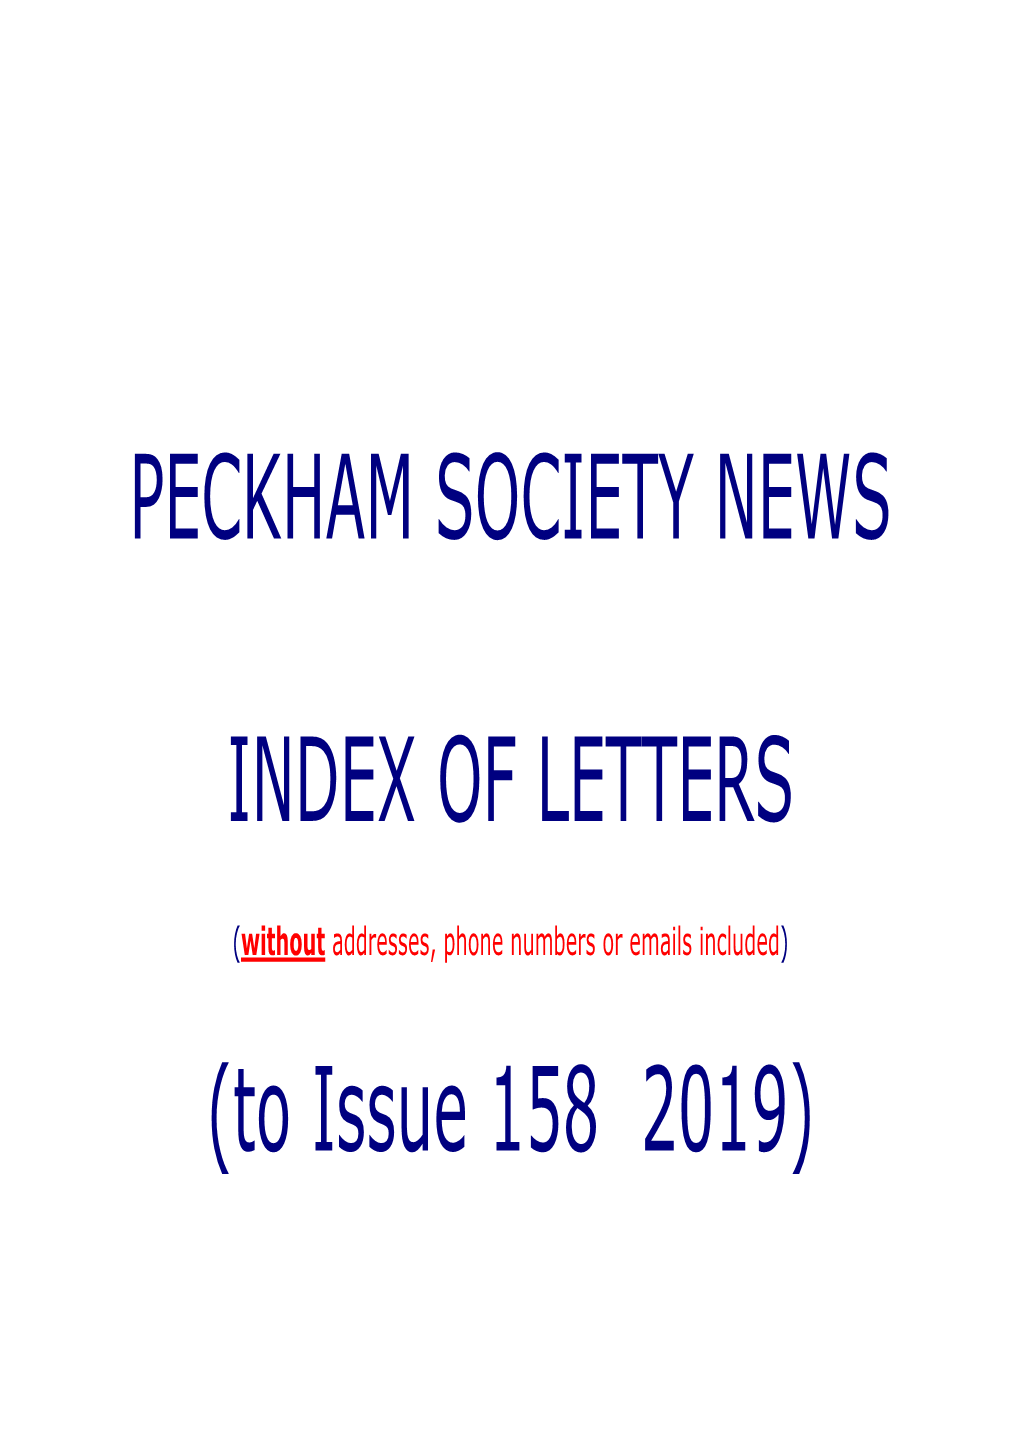 PECKHAM SOCIETY NEWS INDEX of LETTERS (To Issue 158 2019)